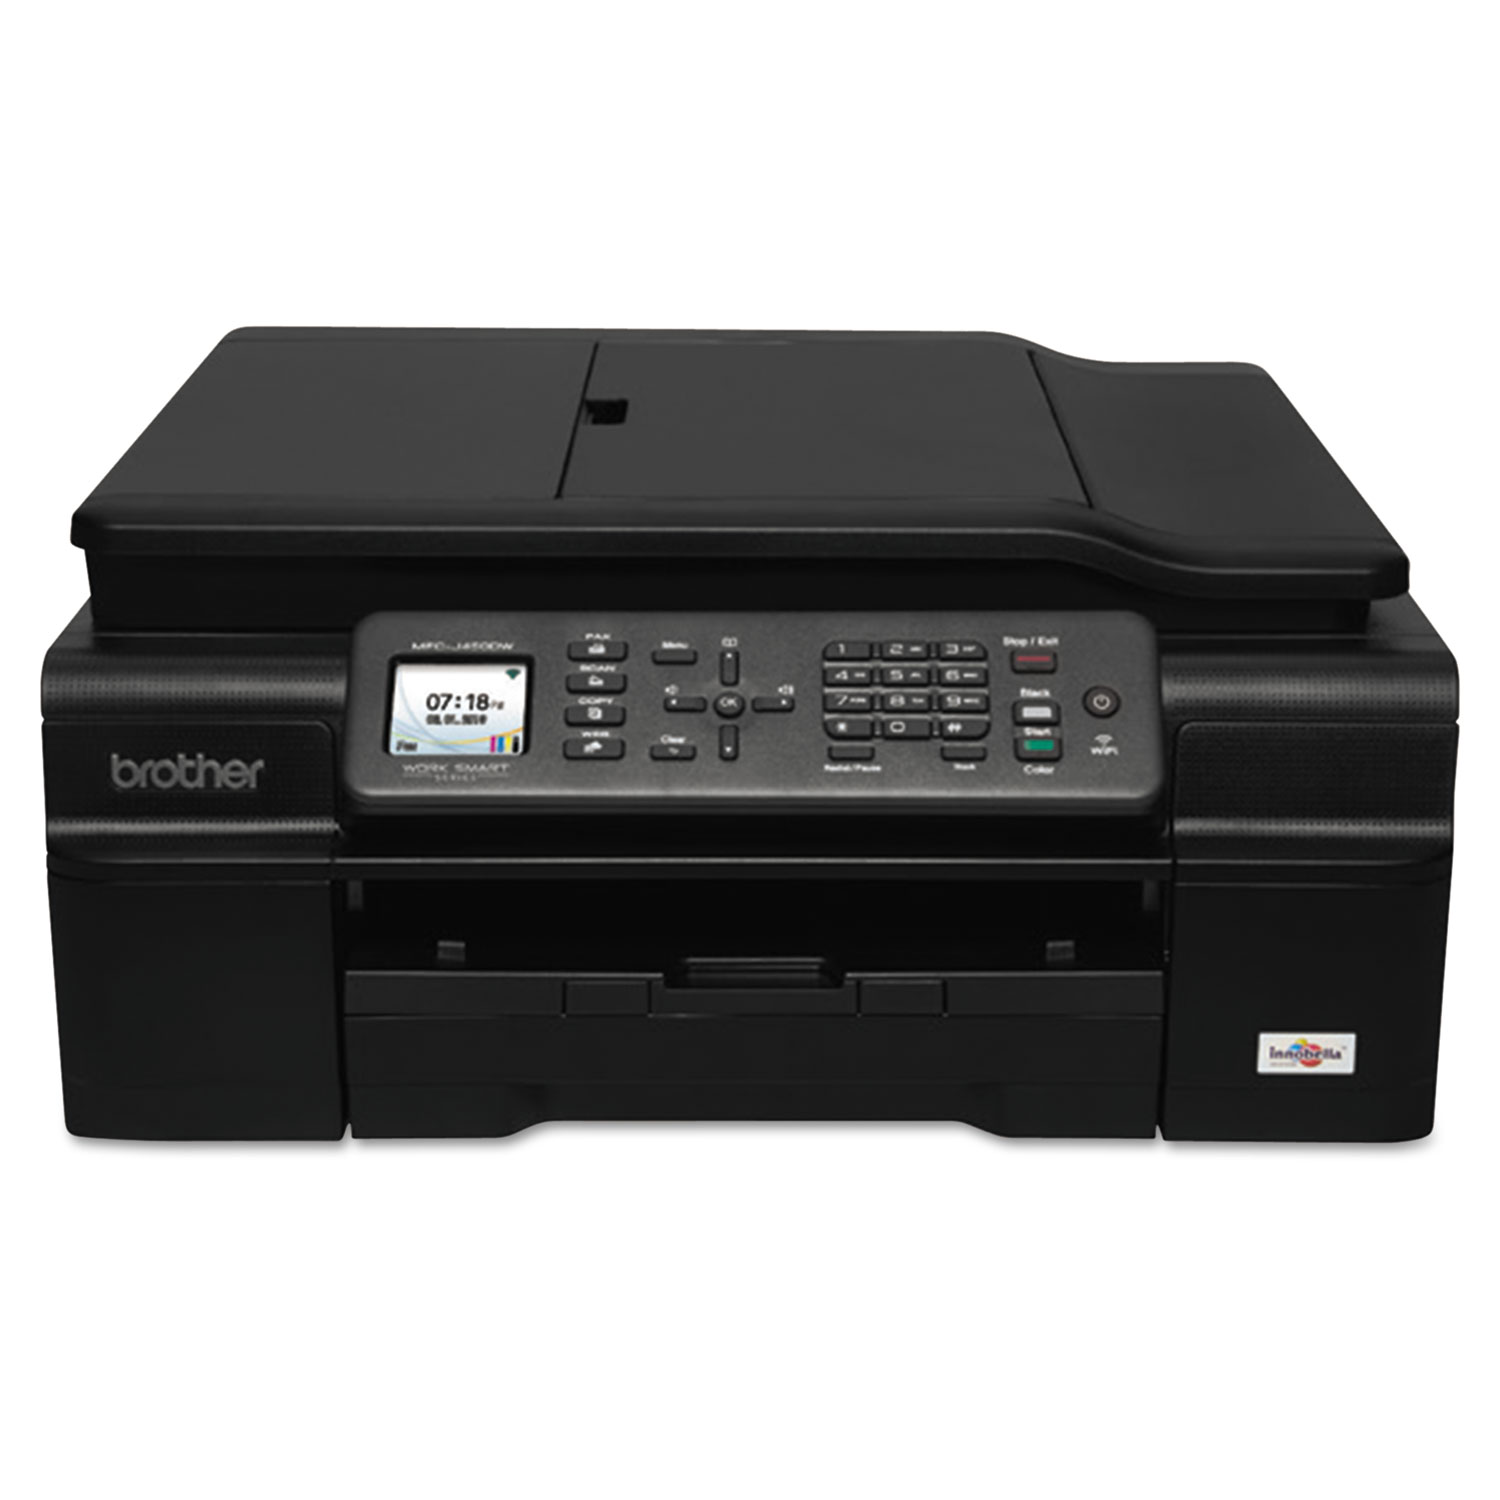 Work Smart MFC-J460DW Color Inkjet All-in-One, Copy/Fax/Print/Scan